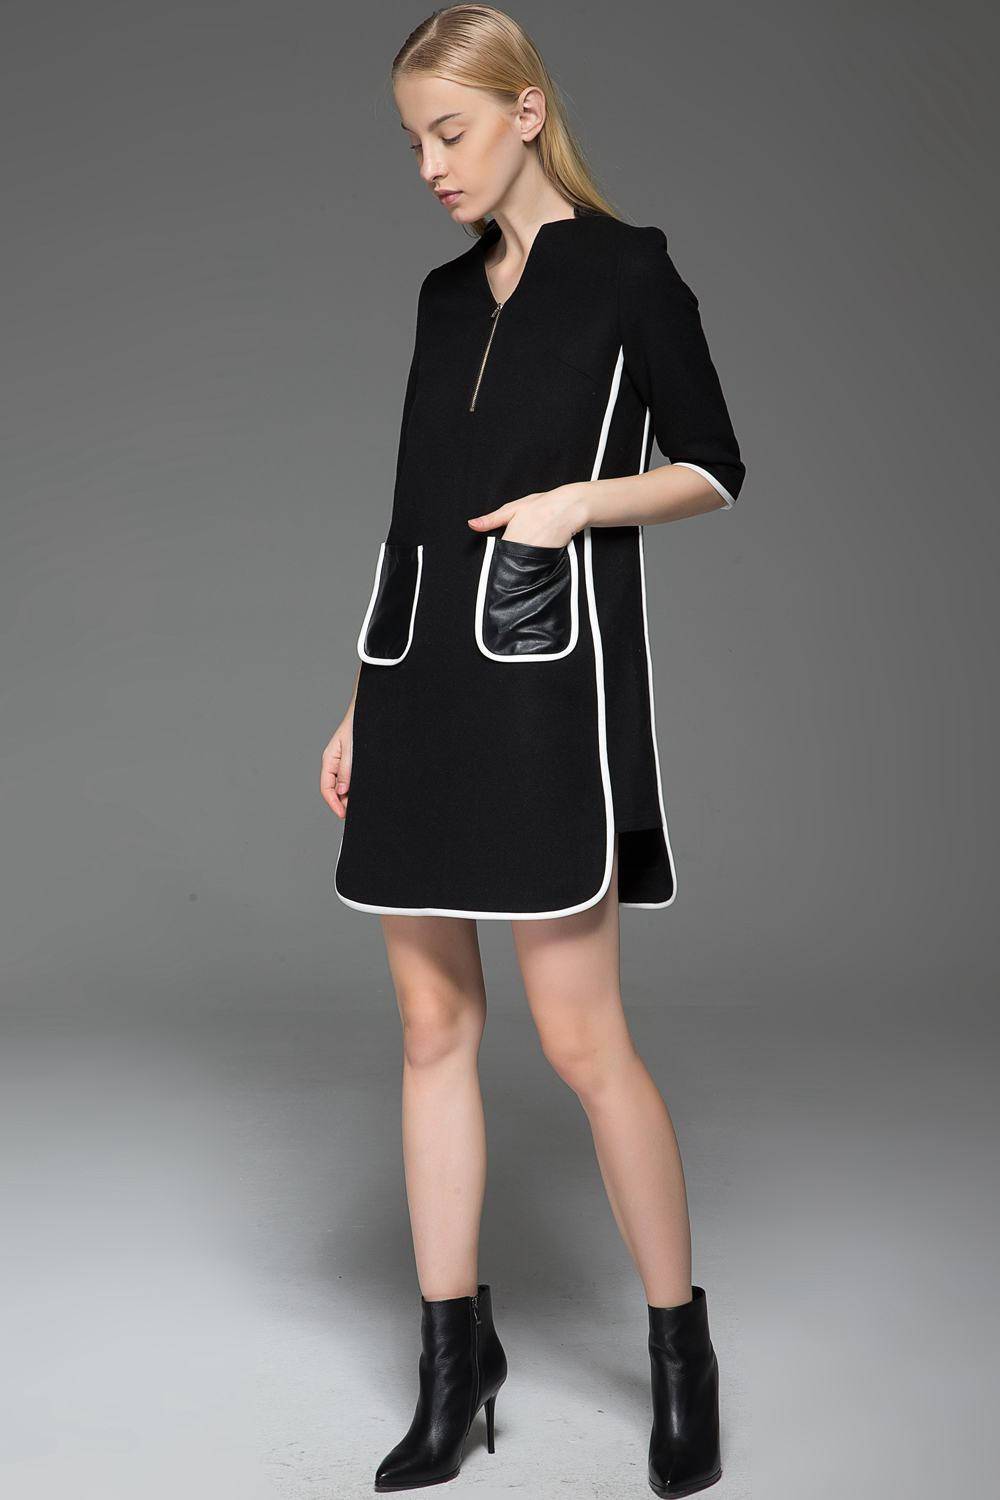 Chanel Style Dress - Black Wool Mini Dress with Cream Piping and Leath –  Ylistyle